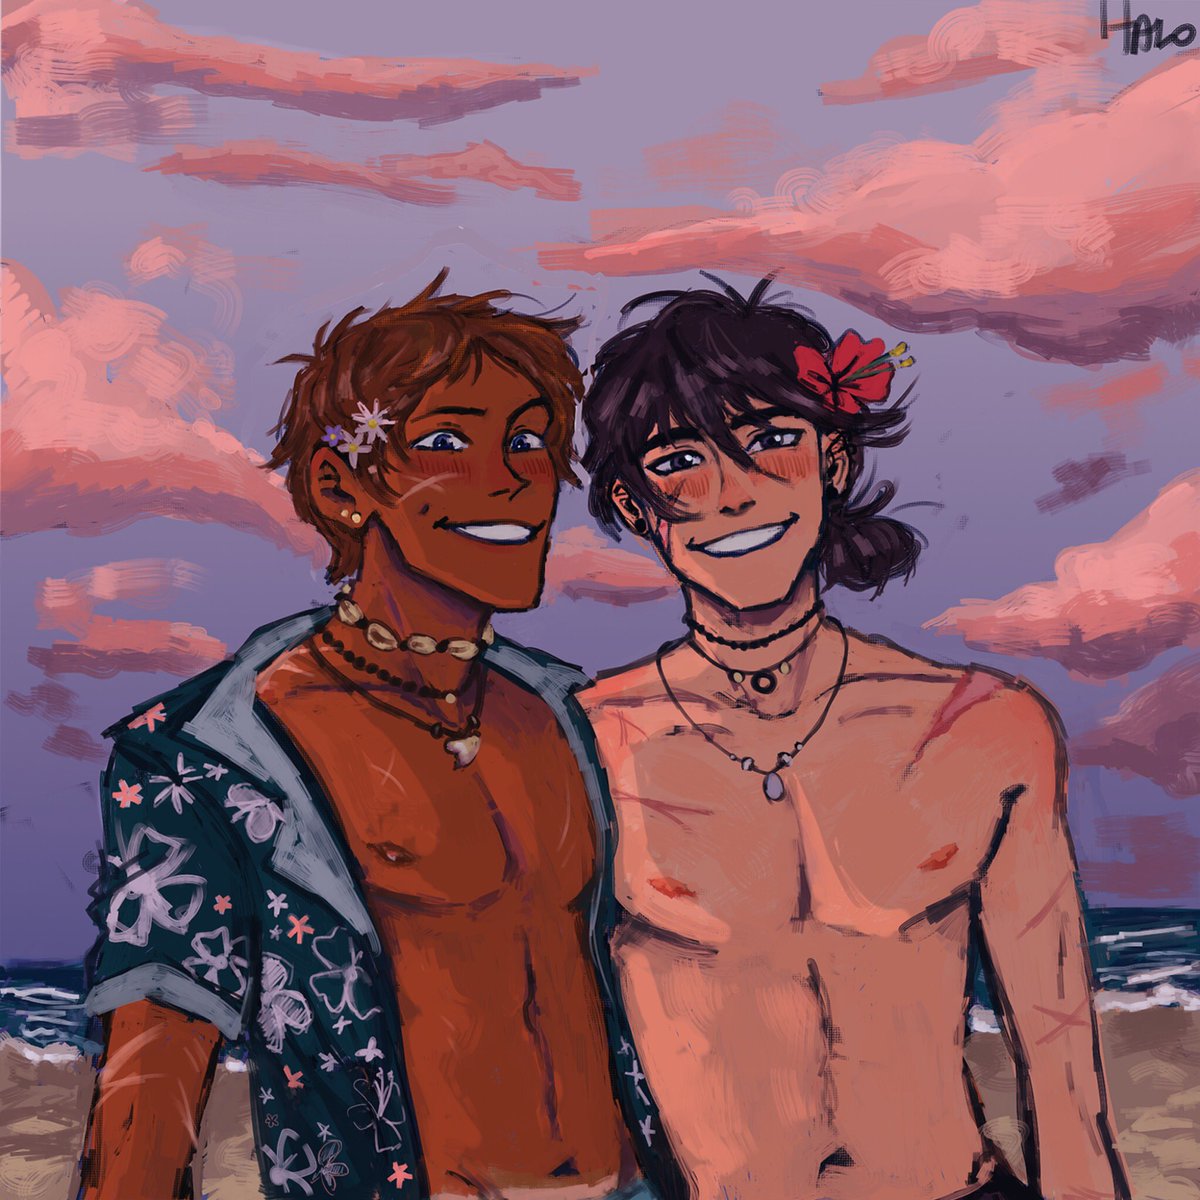 before summer ends, let's make it one of the best moments of our lives 

#klance 